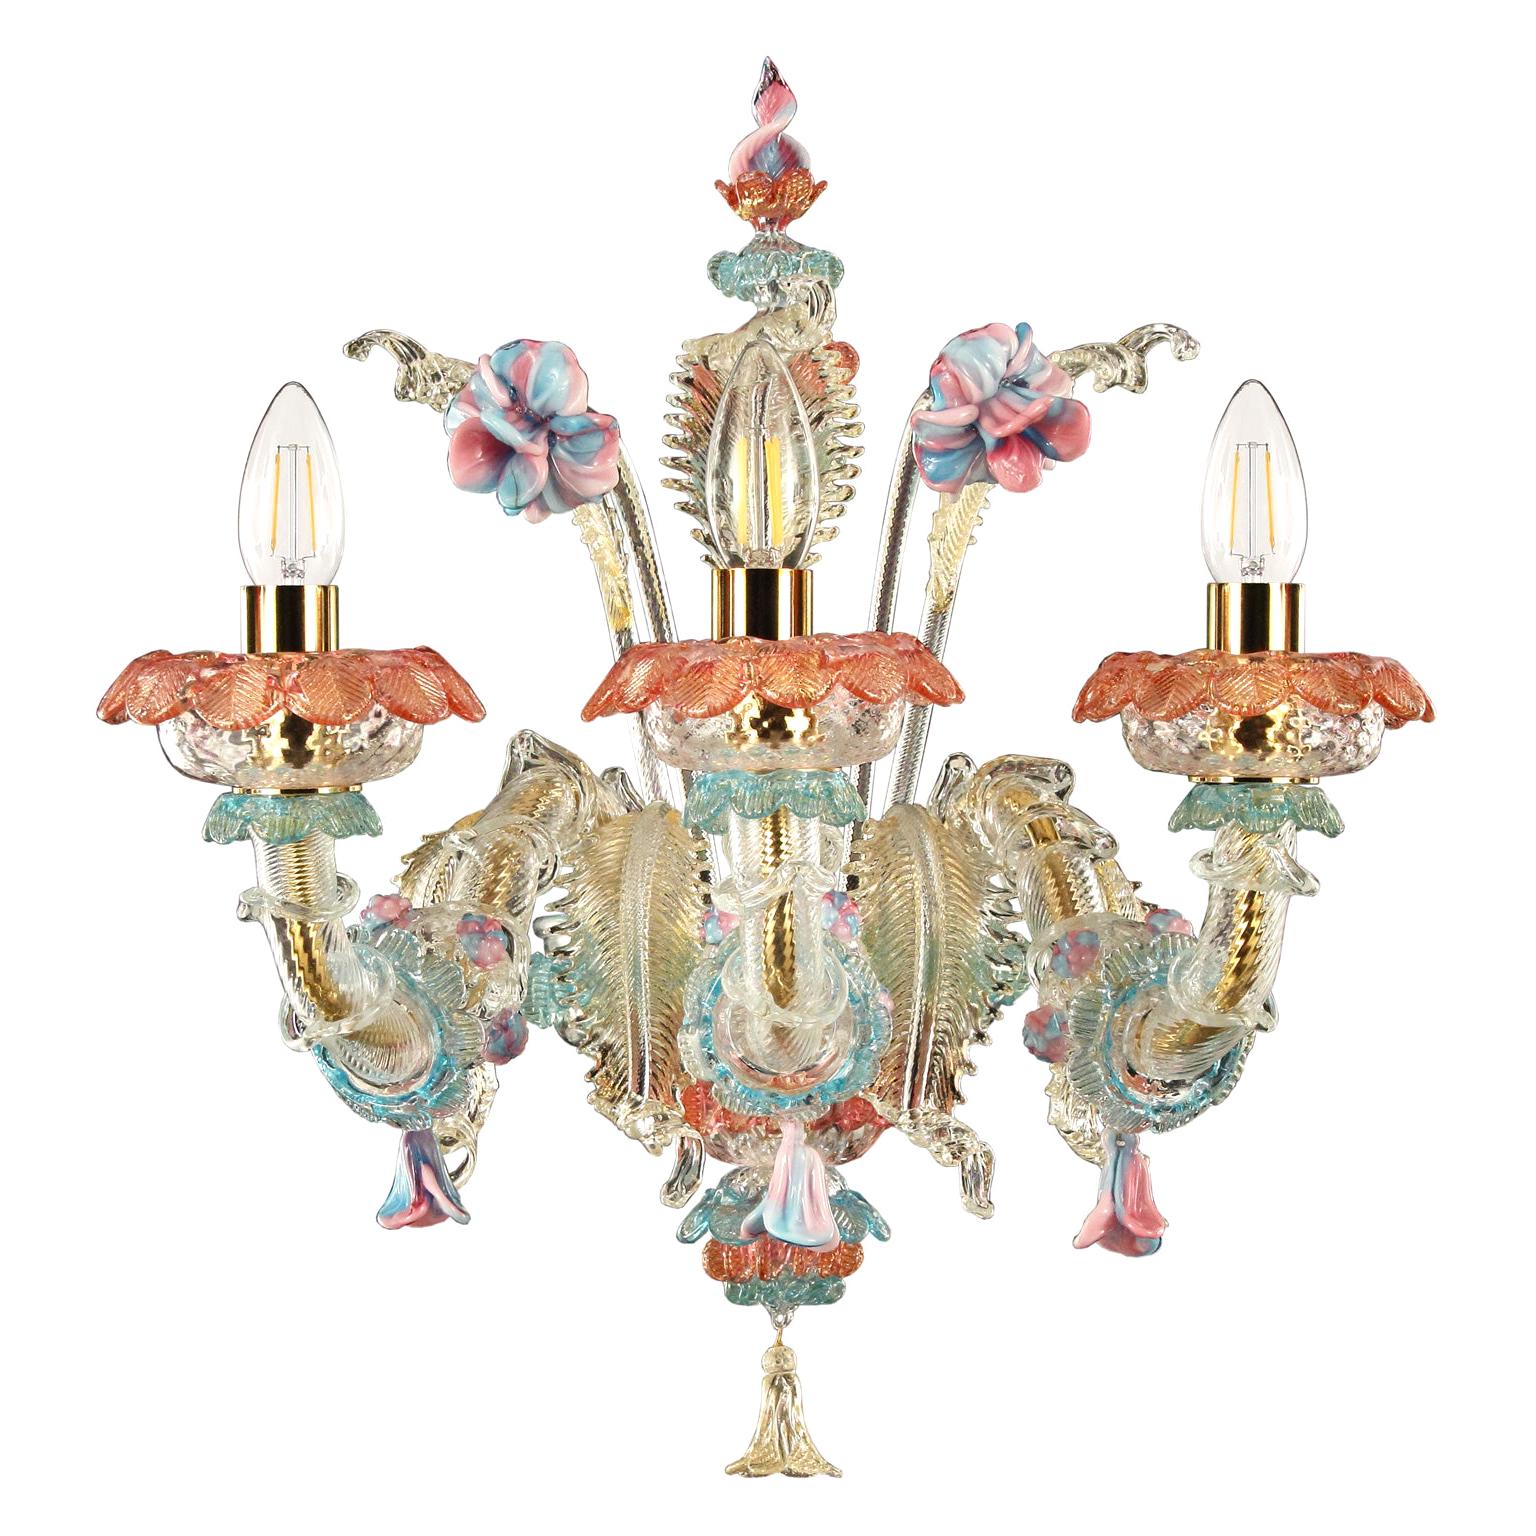 Sconce 3 arms Crystal and Gold, details in Pink and Light Blue by Multiforme